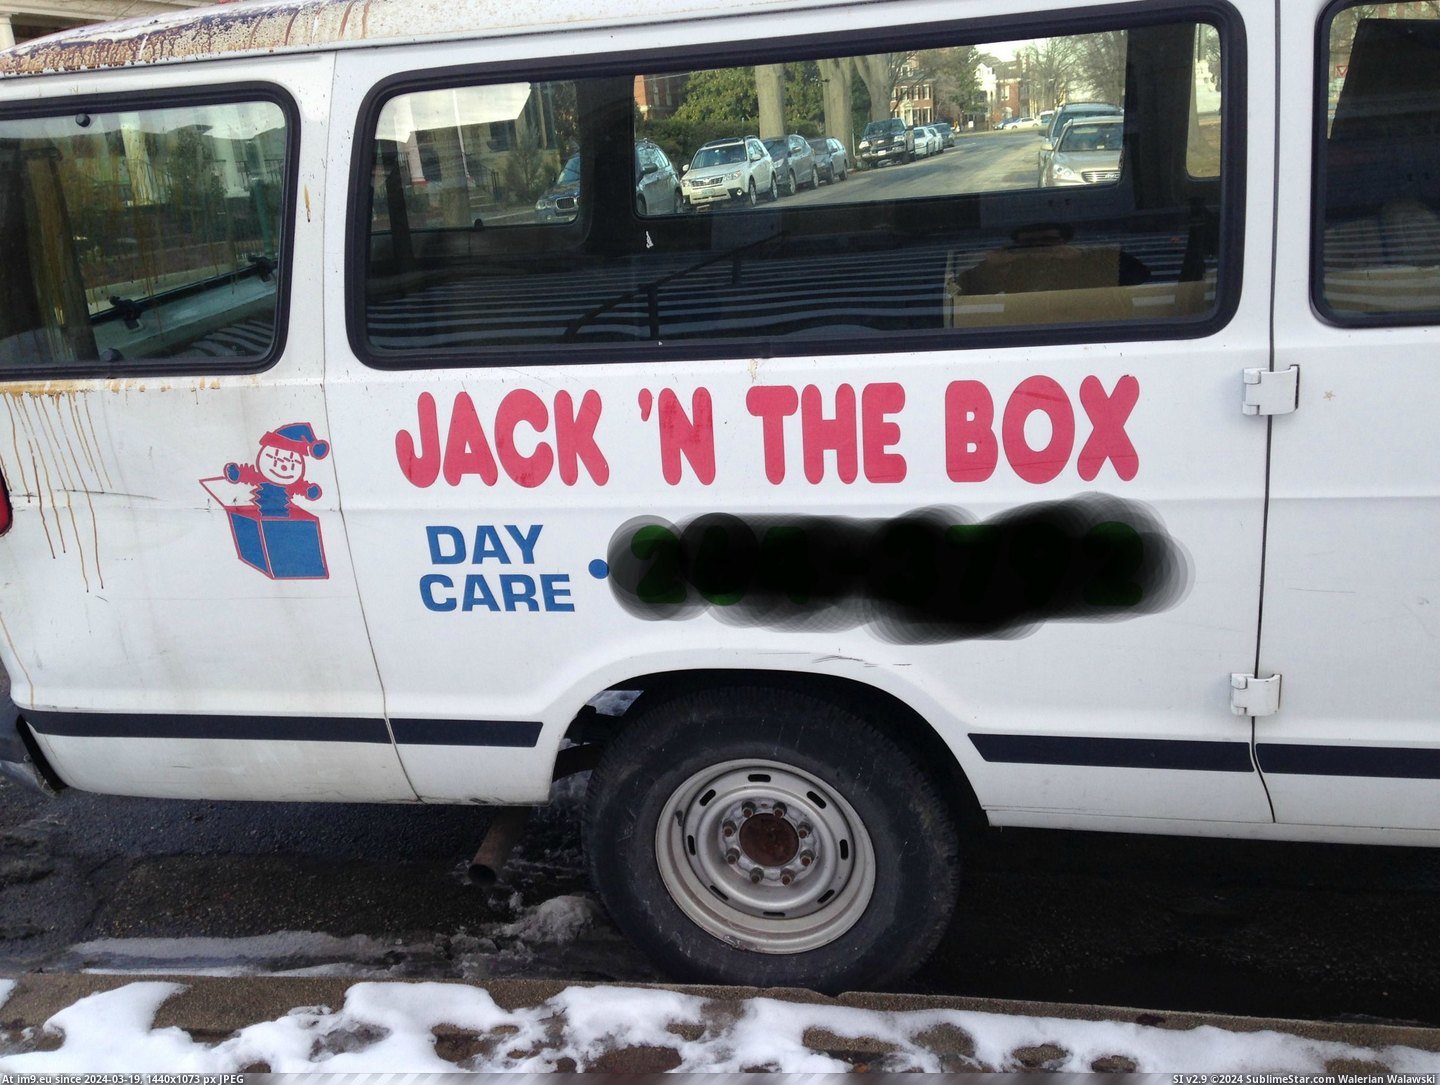 #Wtf #Saw #Town #Van [Wtf] A van I saw in my town. Something doesn't look right... 3 Pic. (Bild von album My r/WTF favs))